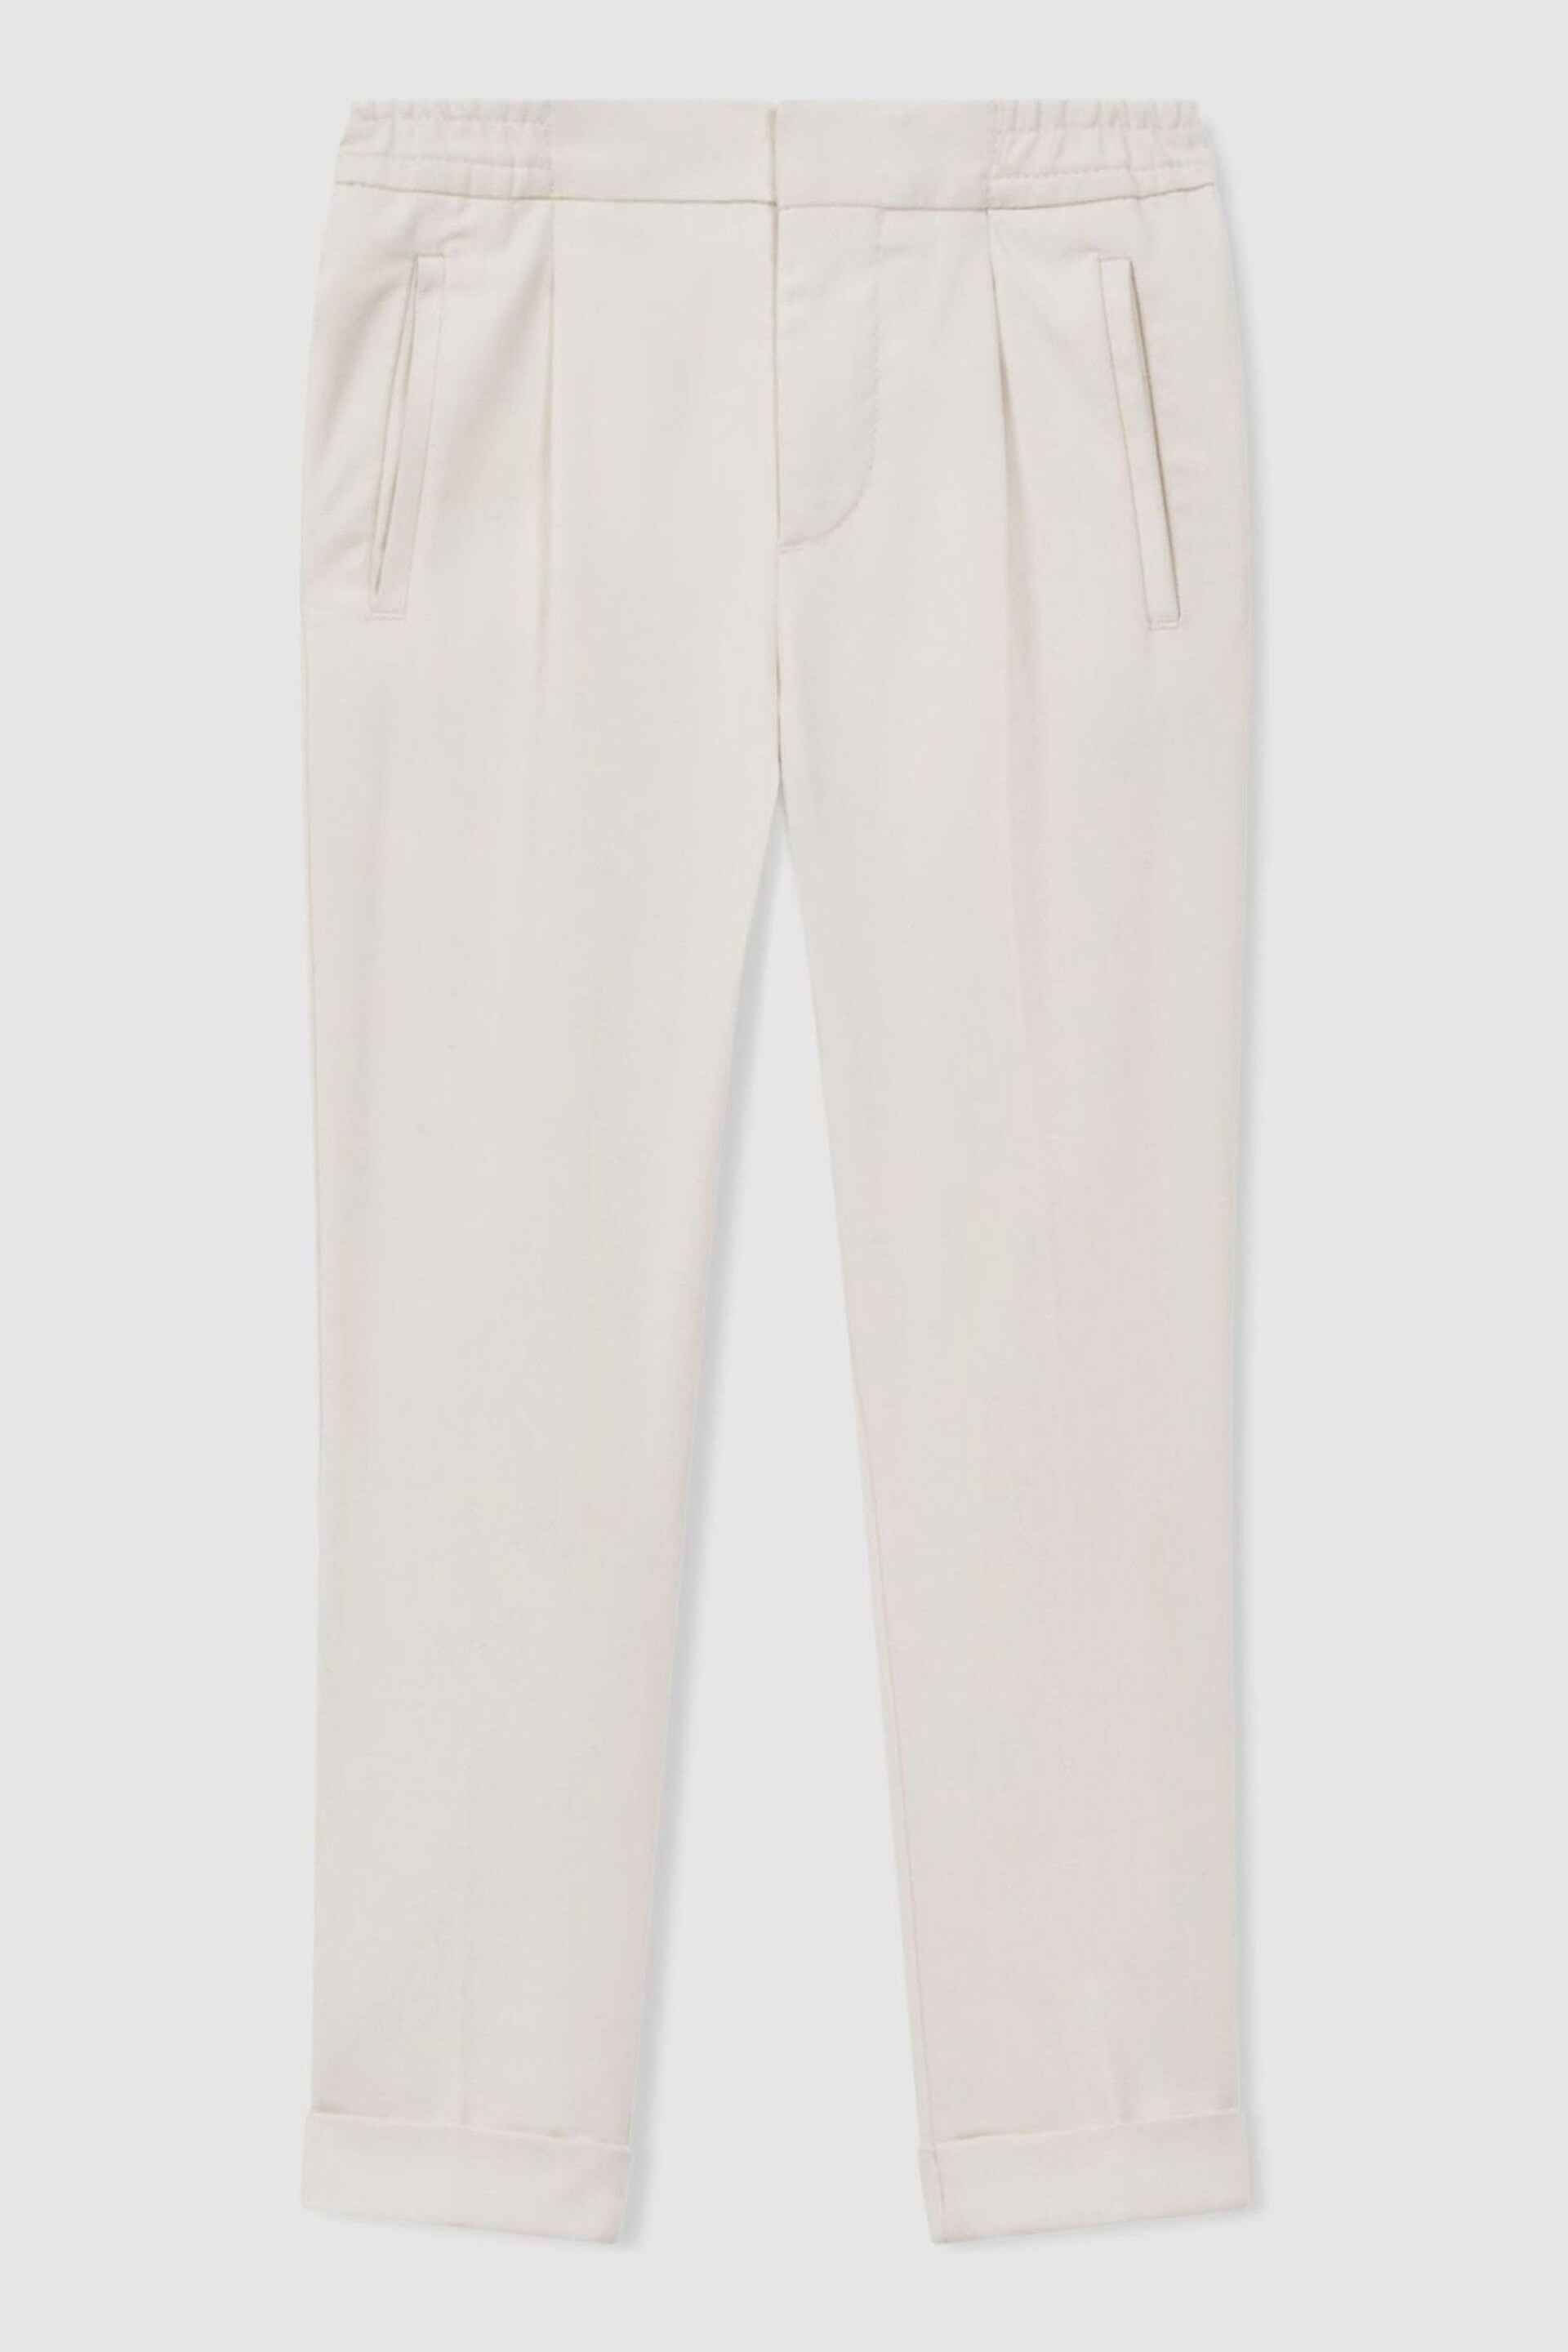 Reiss Ecru Brighton Senior Relaxed Elasticated Trousers with Turn-Ups - Image 2 of 6